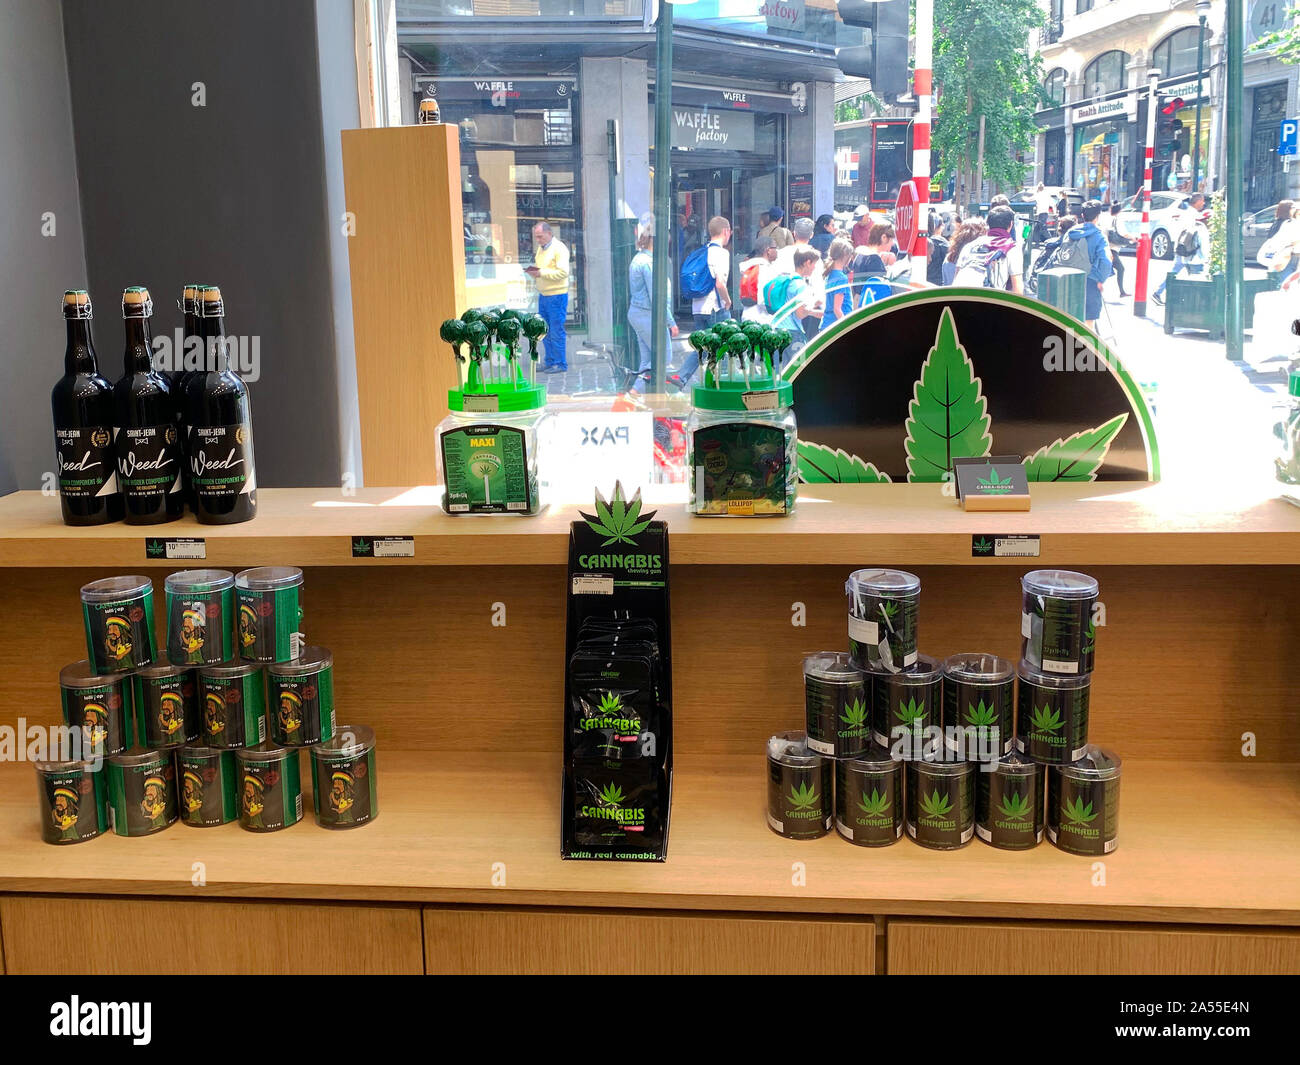 Brussels /Belgium - July 9, 2019: Cannabis shop products in the center of Brussels. Weed products in retail store. Stock Photo